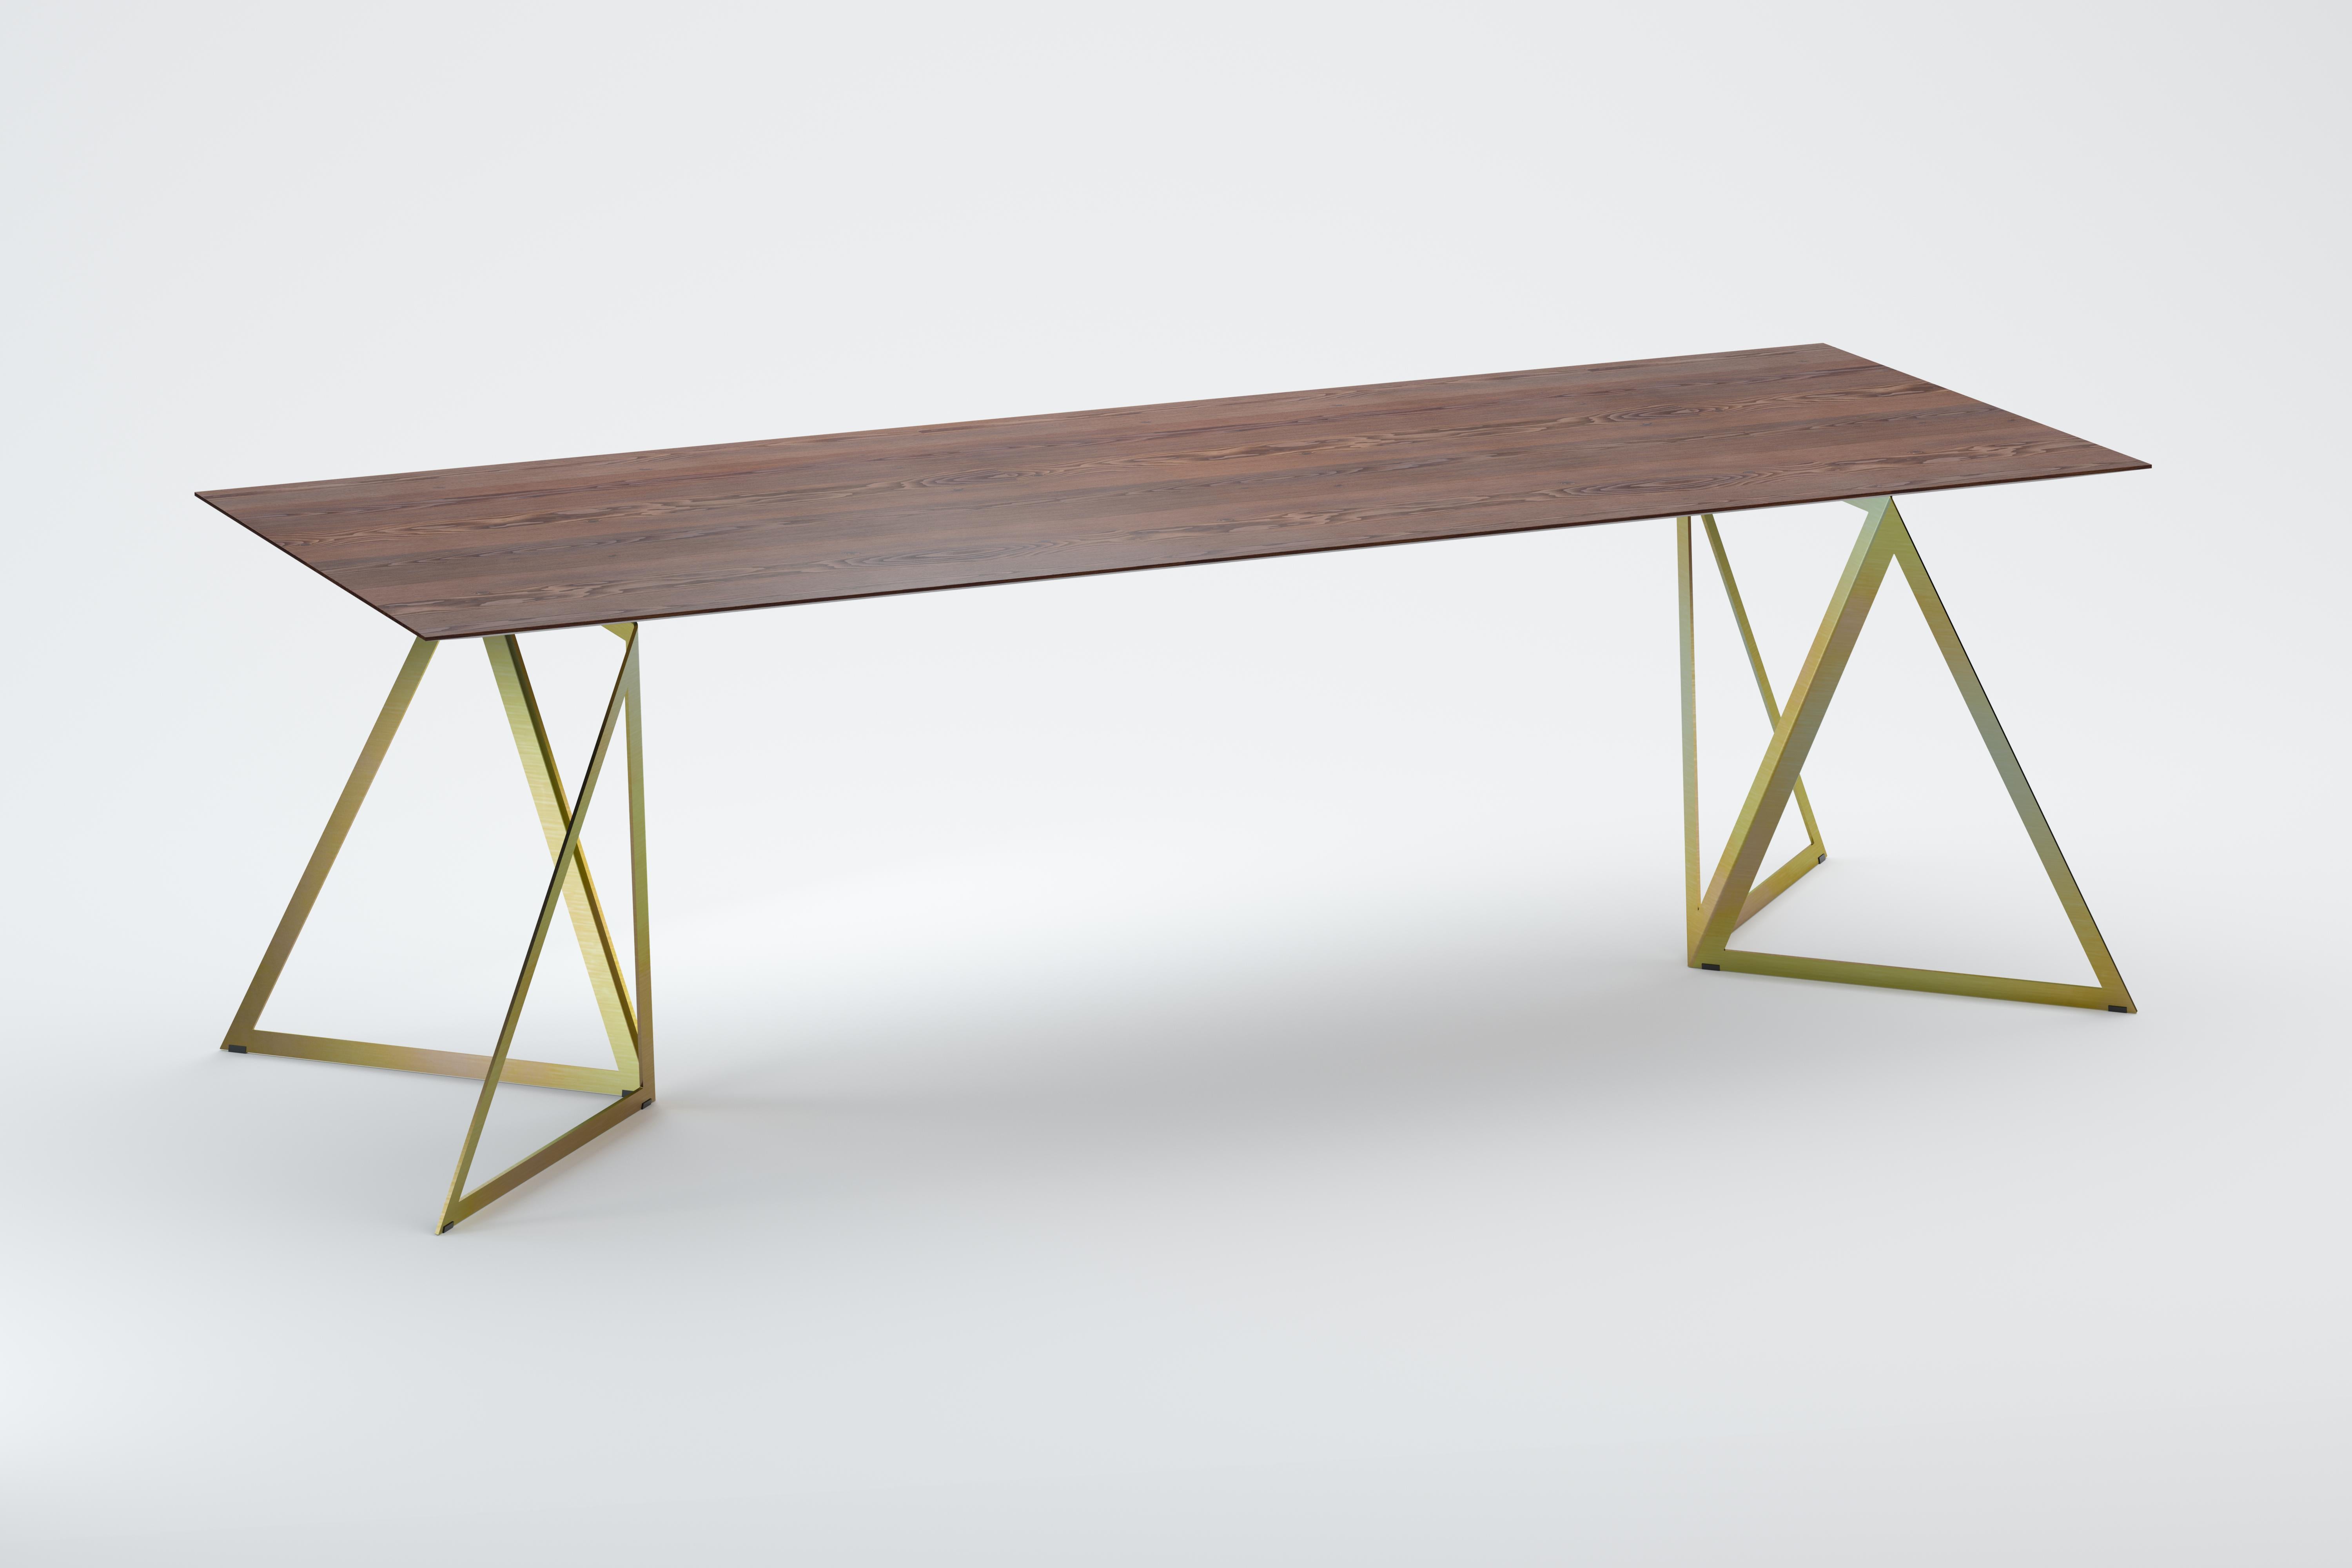 Steel stand table 240 walnut by Sebastian Scherer.
Dimensions: D240 x W90 x H74 cm.
Materials: Walnut, Steel, Wood.
Also Available: Colours:Solid wood (matt lacquered or oiled): black and white stained ash / natural oak / american walnut
Steel